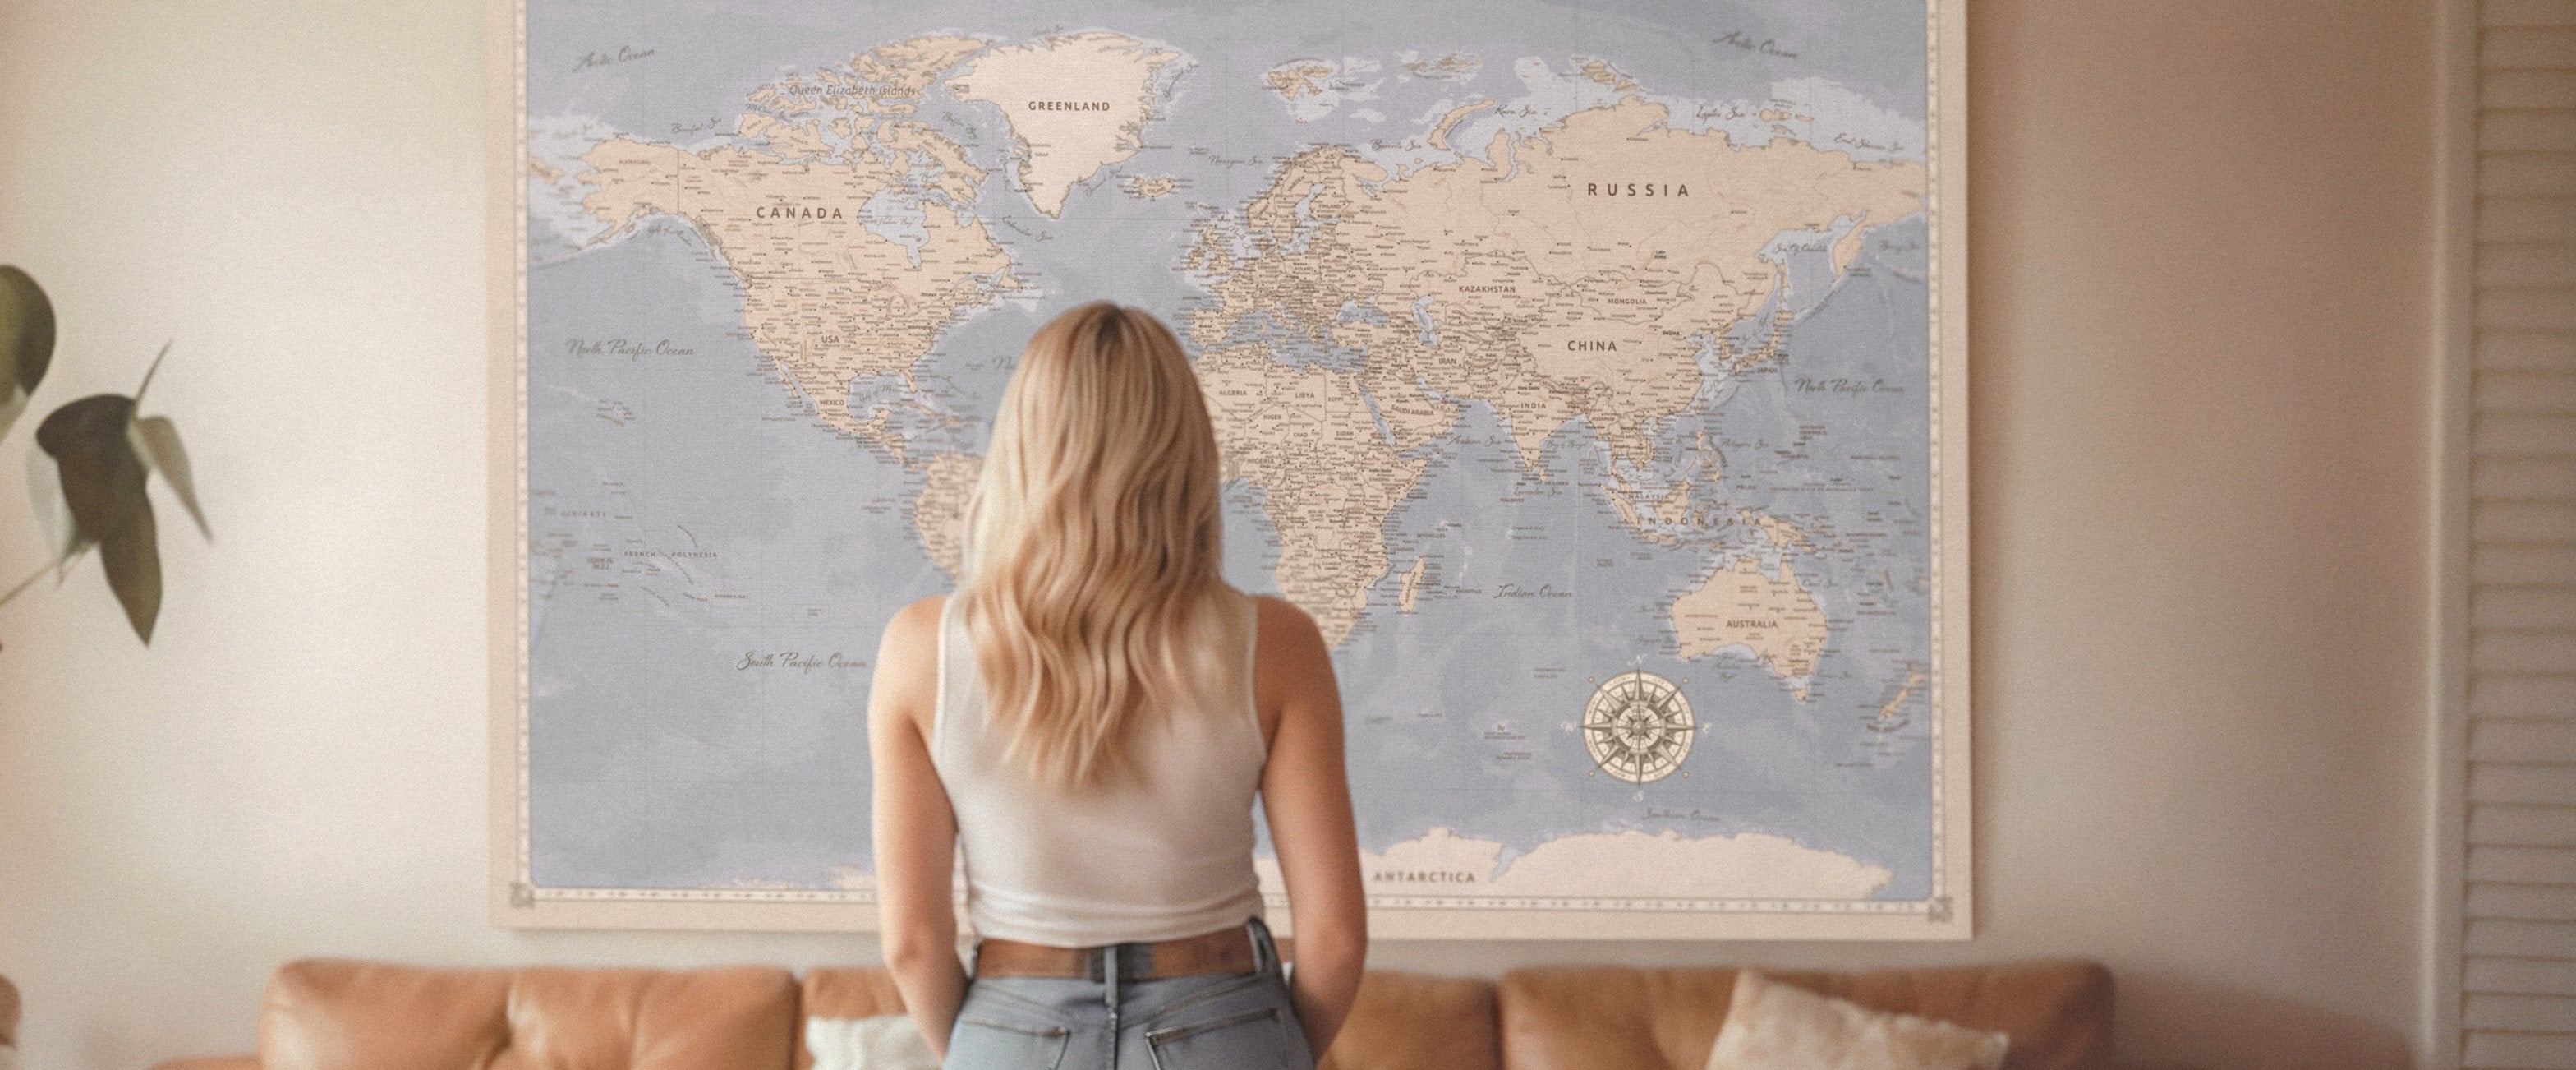 Blonde woman looking at a large personalised travel world map pinboard on the wall, perfect gift for travellers, pushpin cork board.